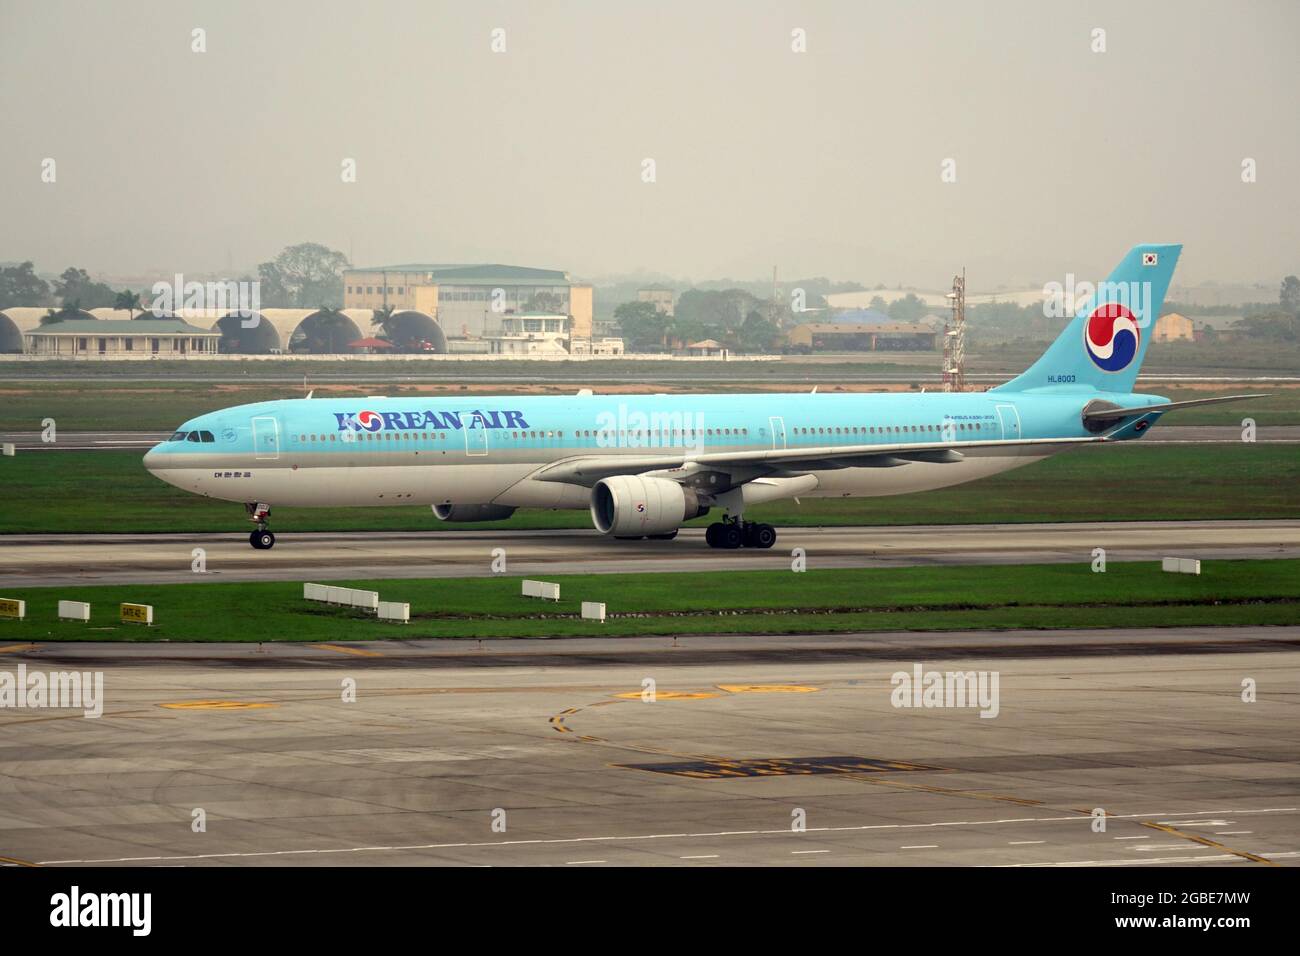 Korean Air (is the largest airline of Korea), Airbus A330-300 airplane Stock Photo